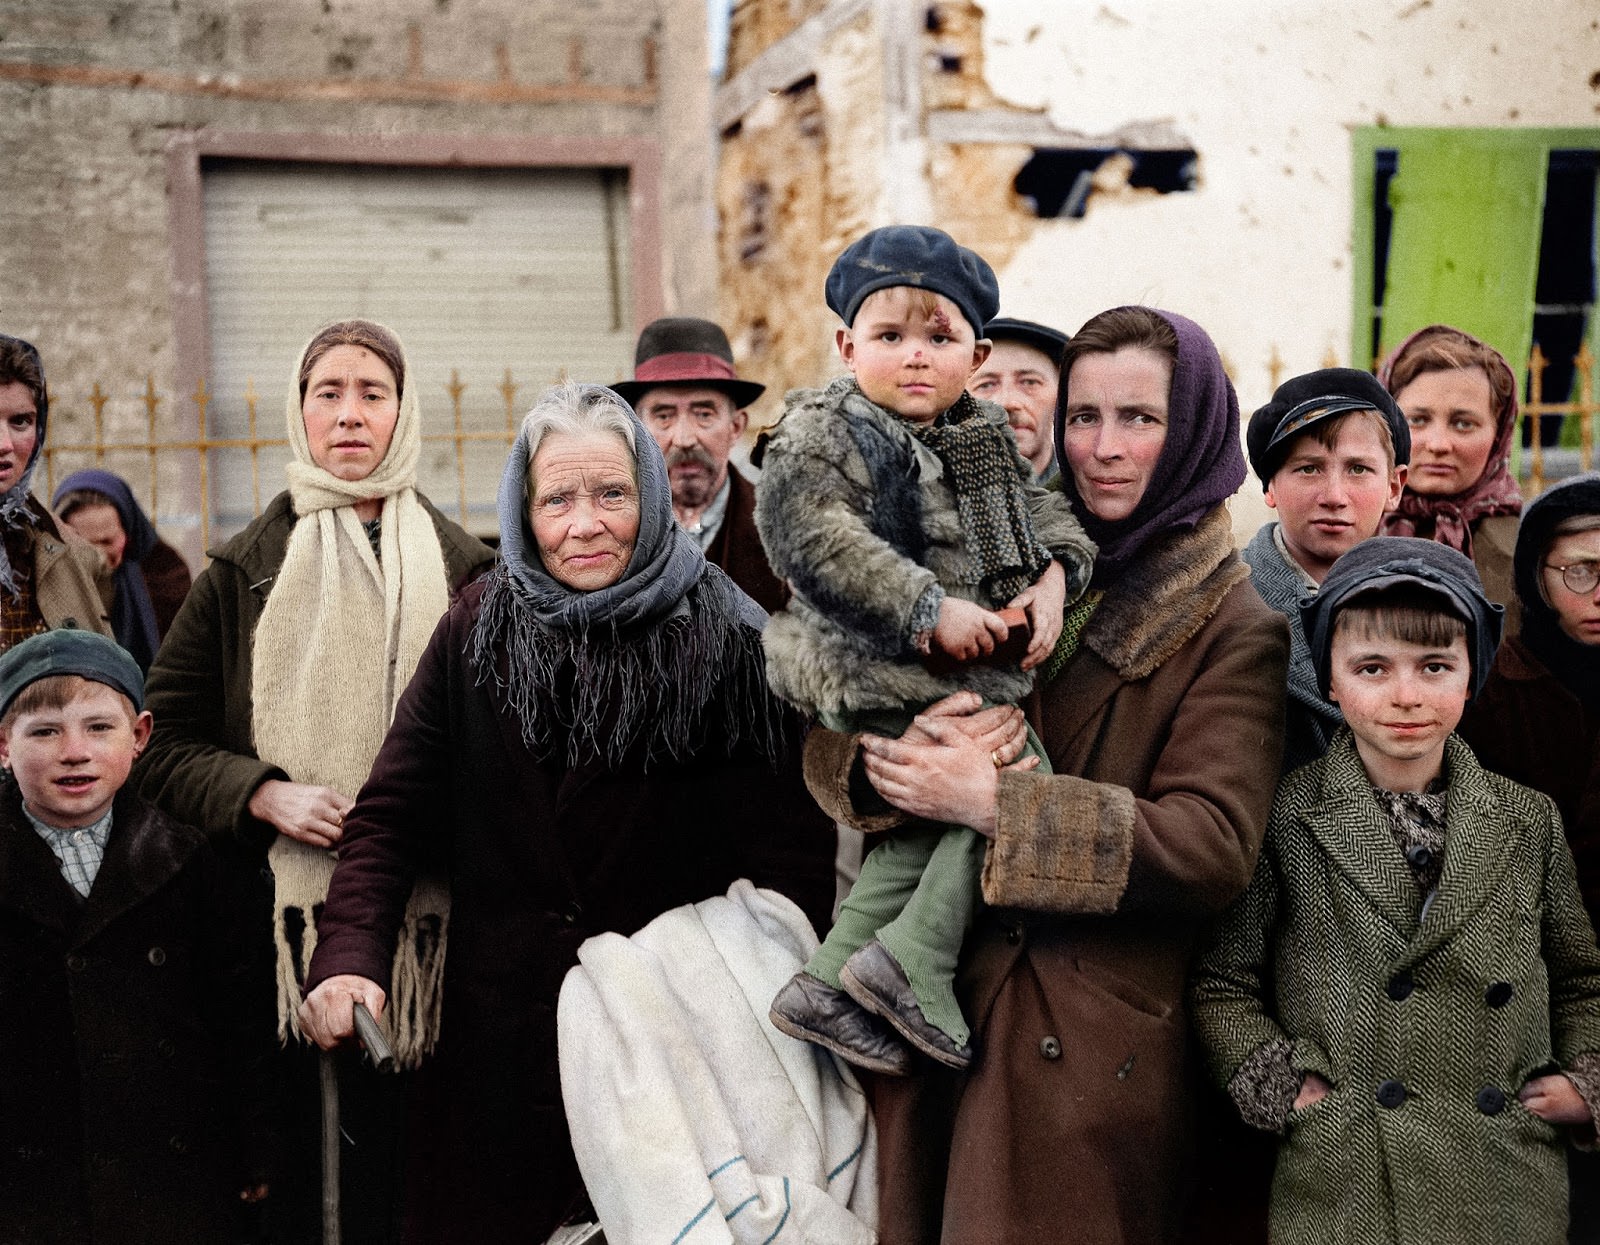 Refugees stand in a group on a street in La Gleize, Belgium on Jan. 2, 1945. They are waiting to be transported from the war-torn town after its recapture by American forces during the German thrust into the Belgium-Luxembourg salient.